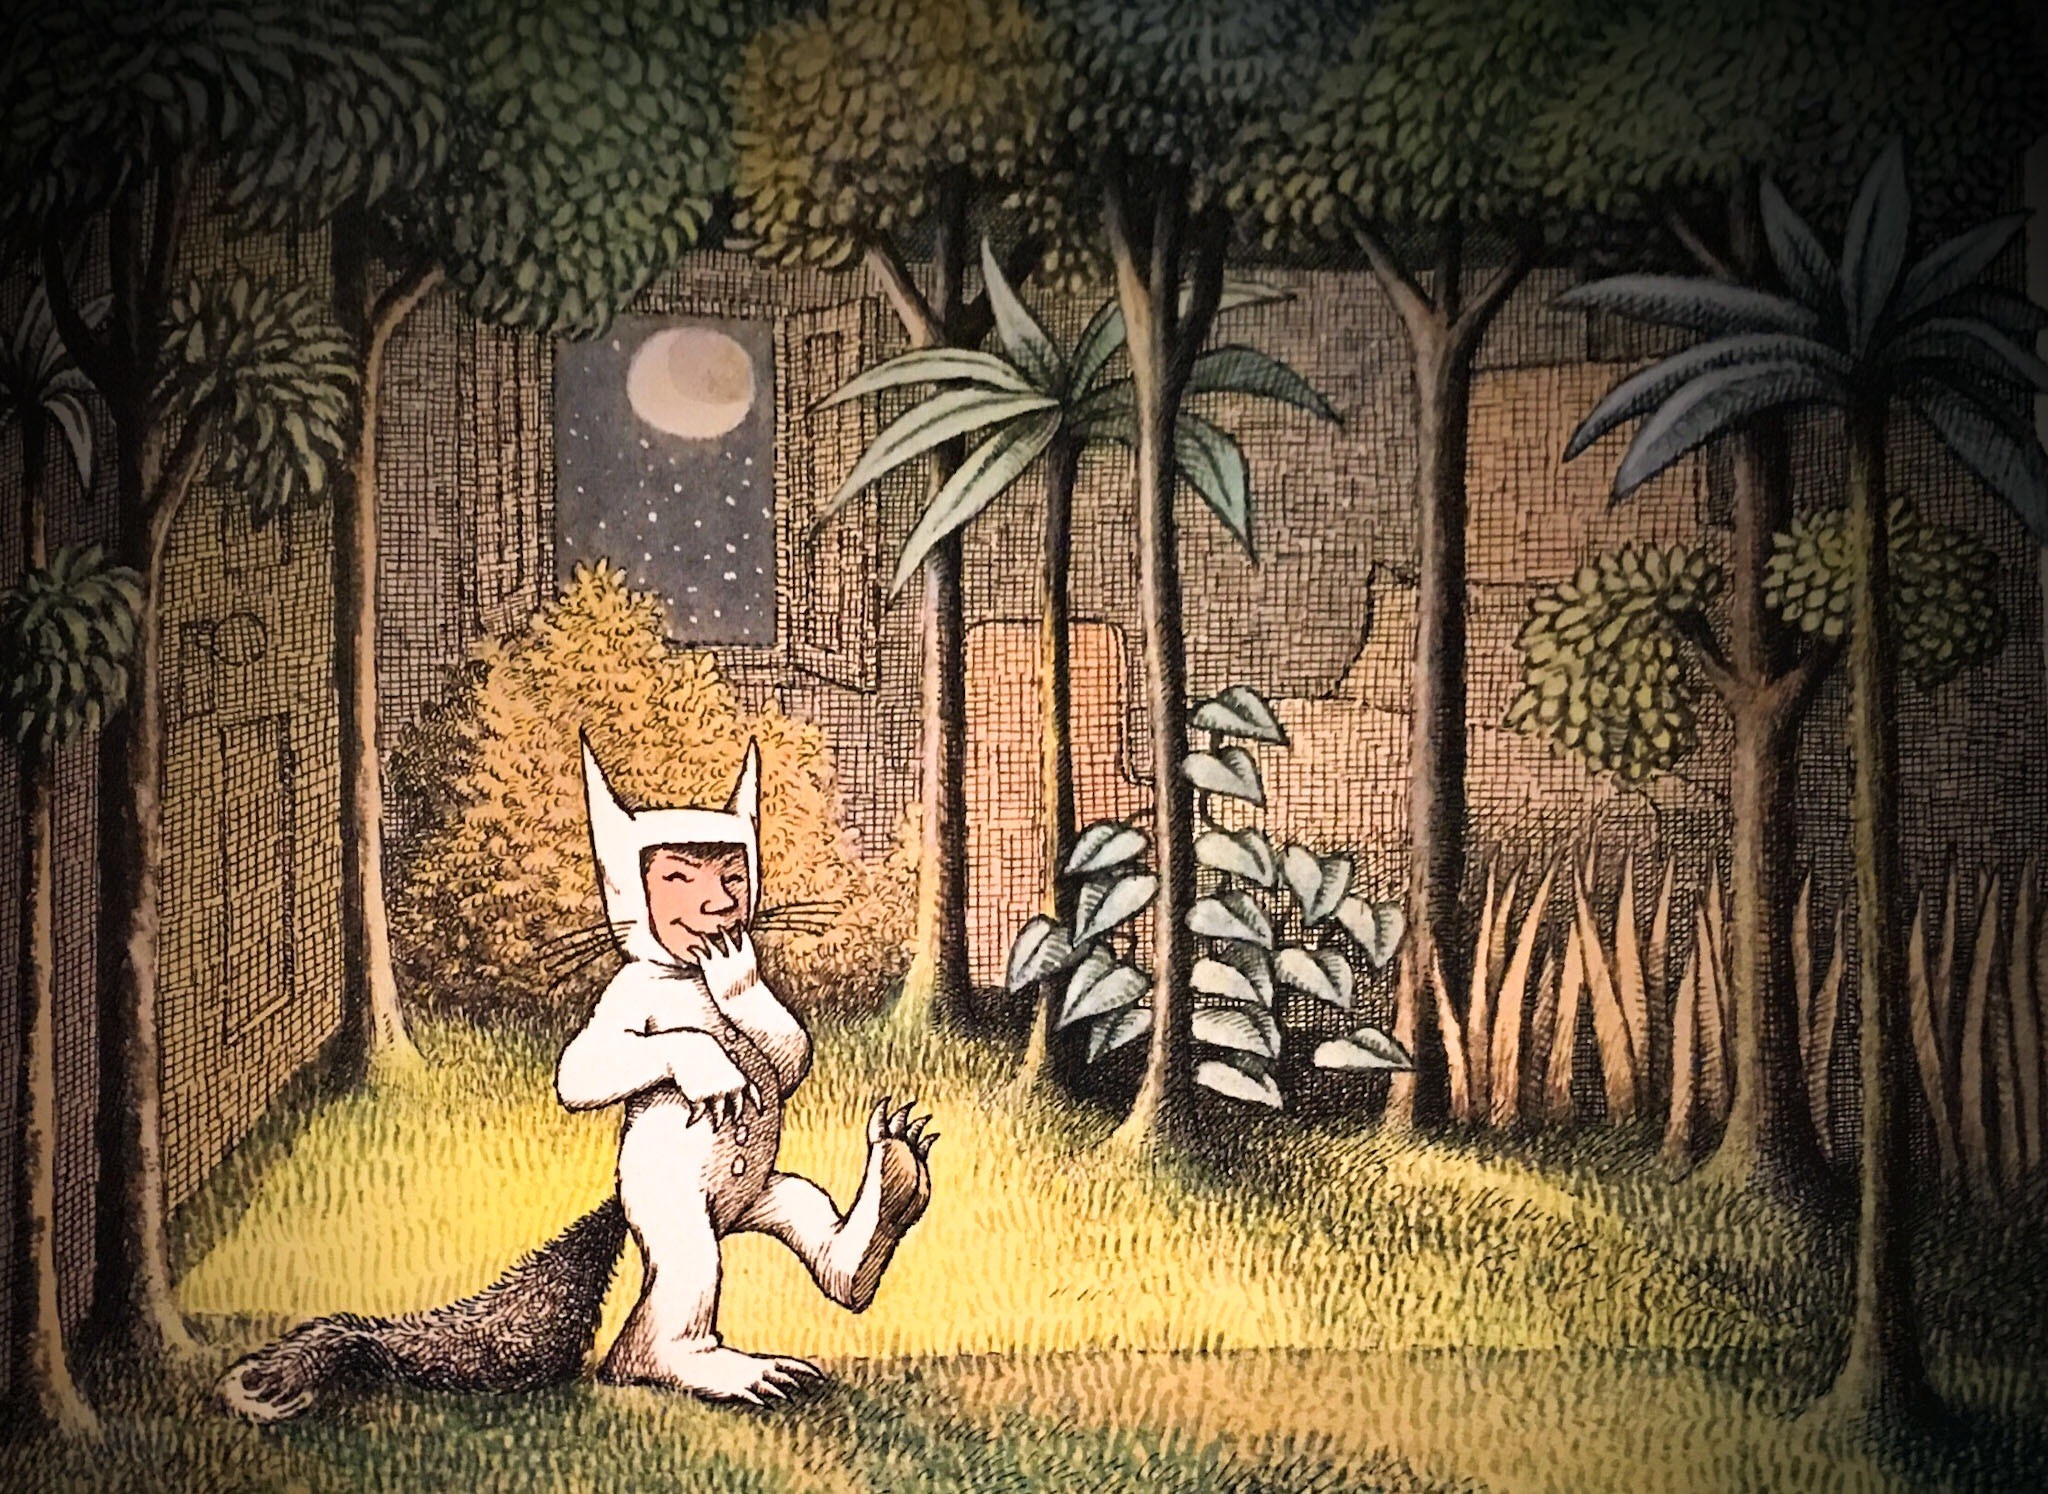 General 2048x1494 Where the Wild Things Are forest books